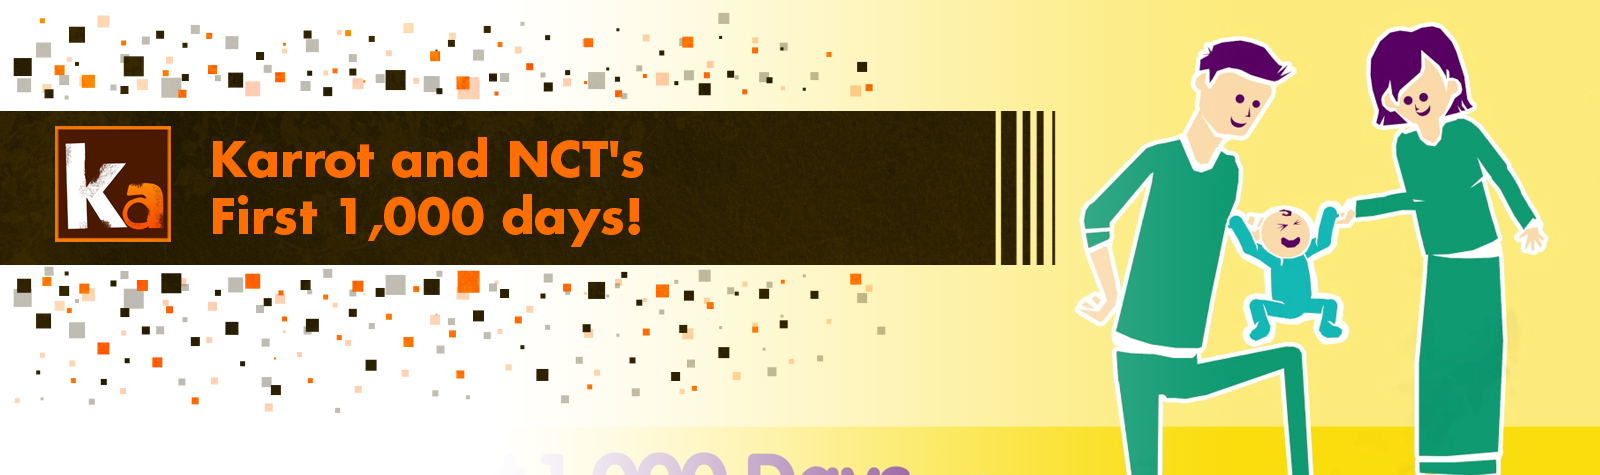 Karrot and NCT’s First 1,000 days!